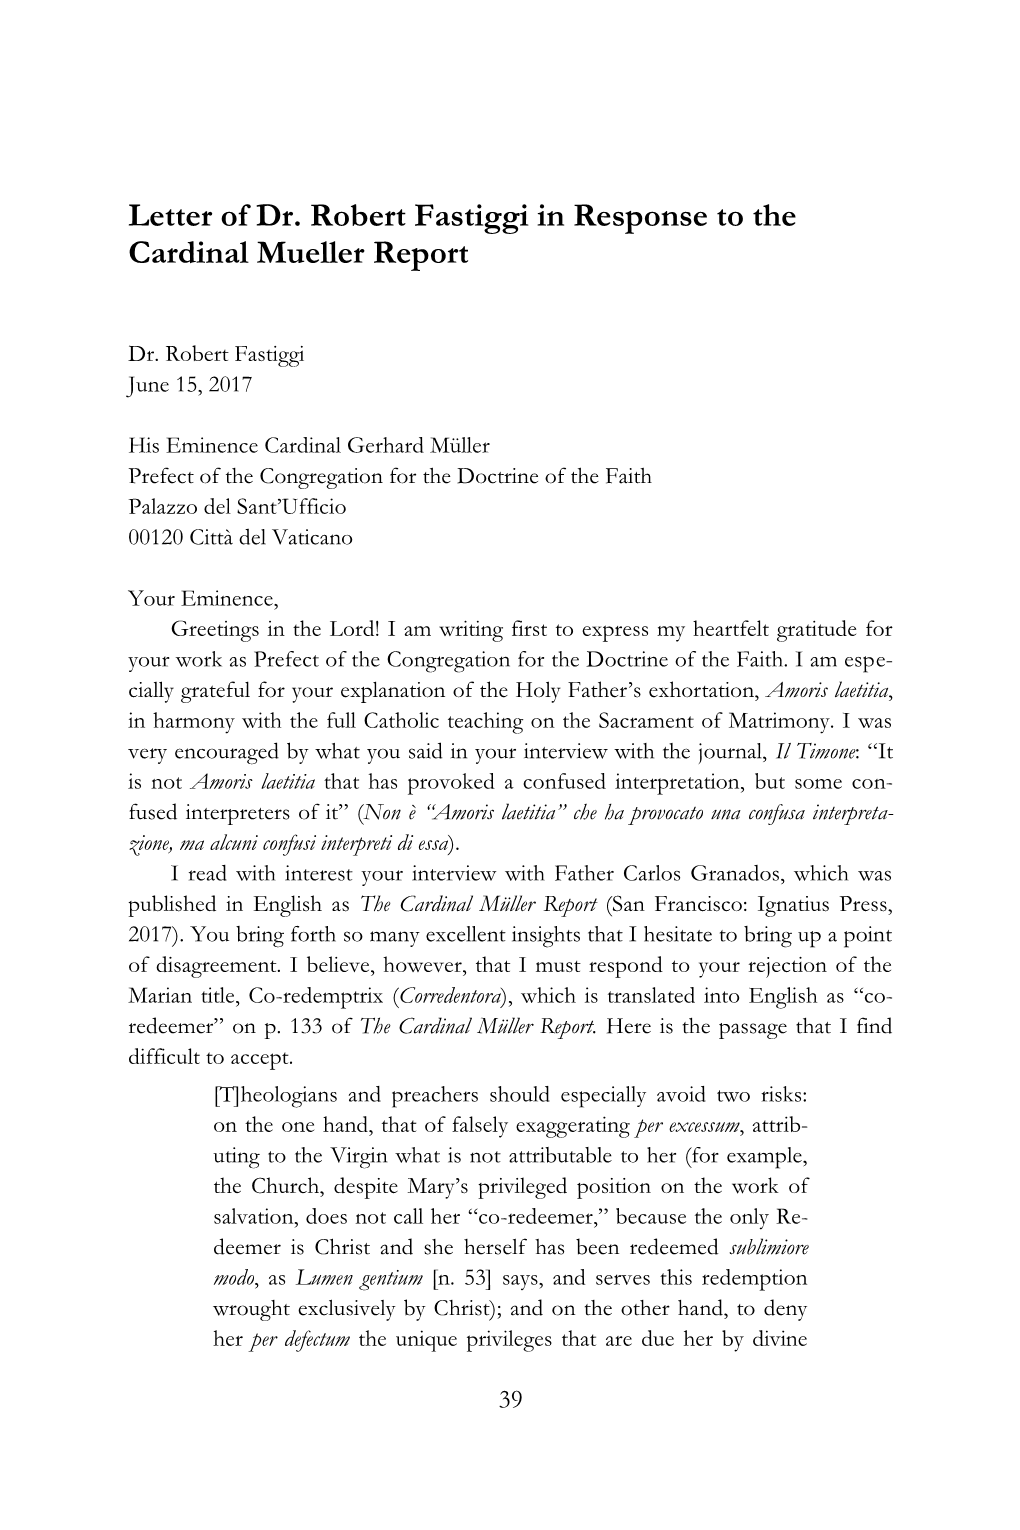 Letter of Dr. Robert Fastiggi in Response to the Cardinal Mueller Report